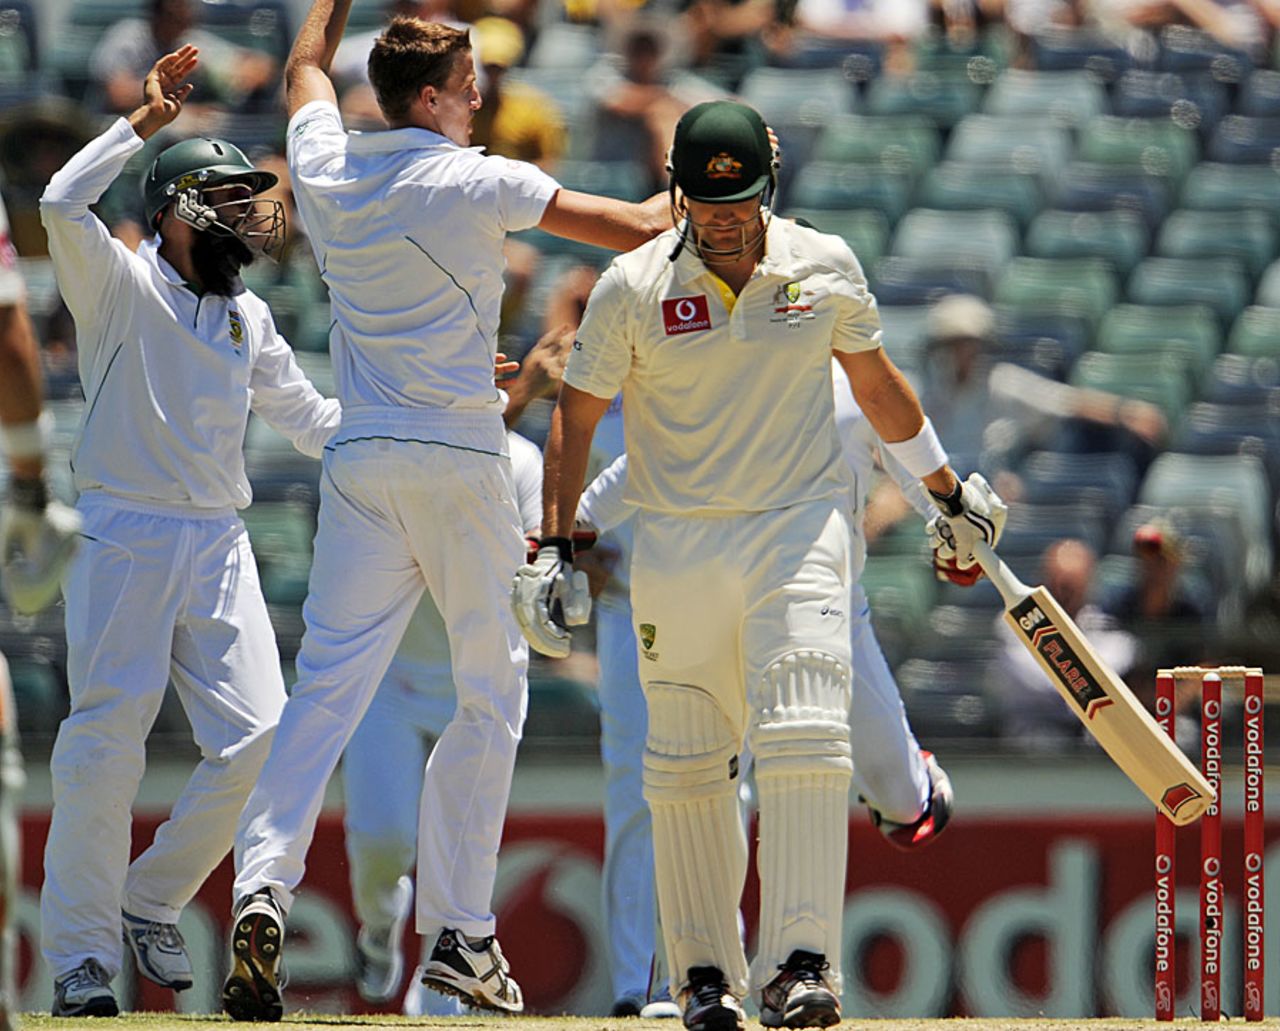 Shane Watson edged to slip to be out for 25, Australia v South Africa, 3rd Test, Perth, 4th day, December 3, 2012